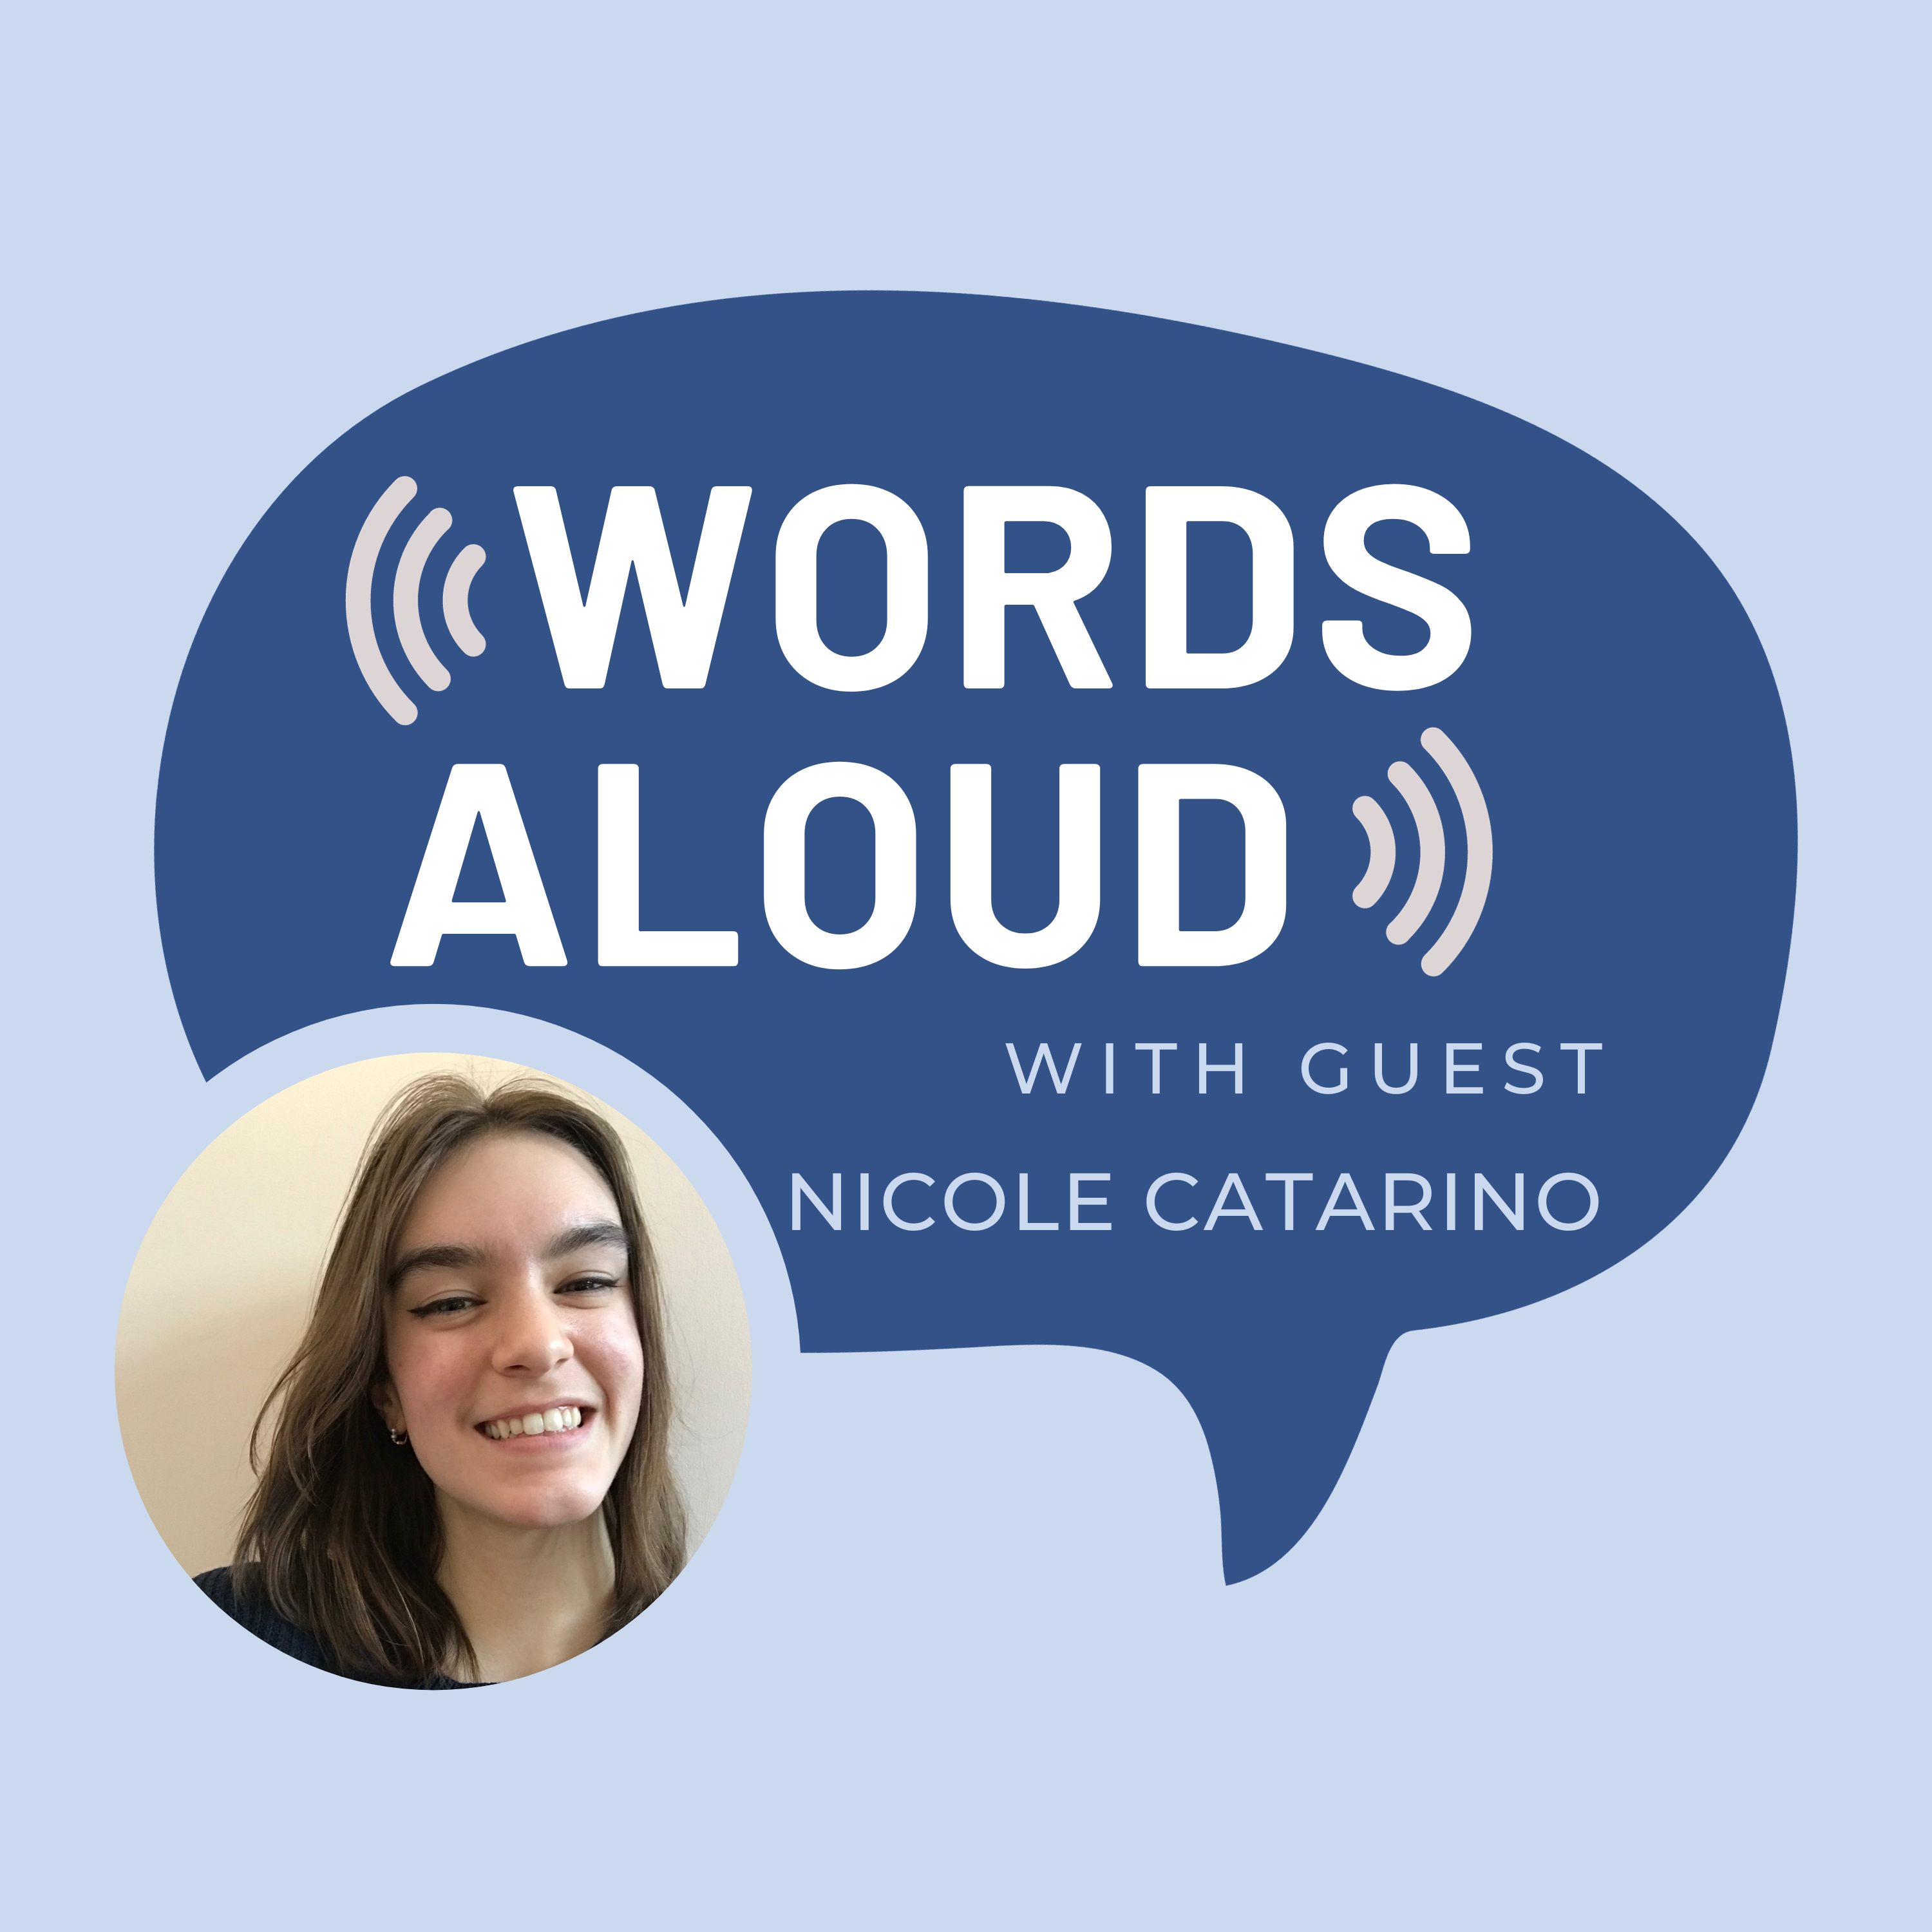 Words Aloud with guest Nicole Catarino